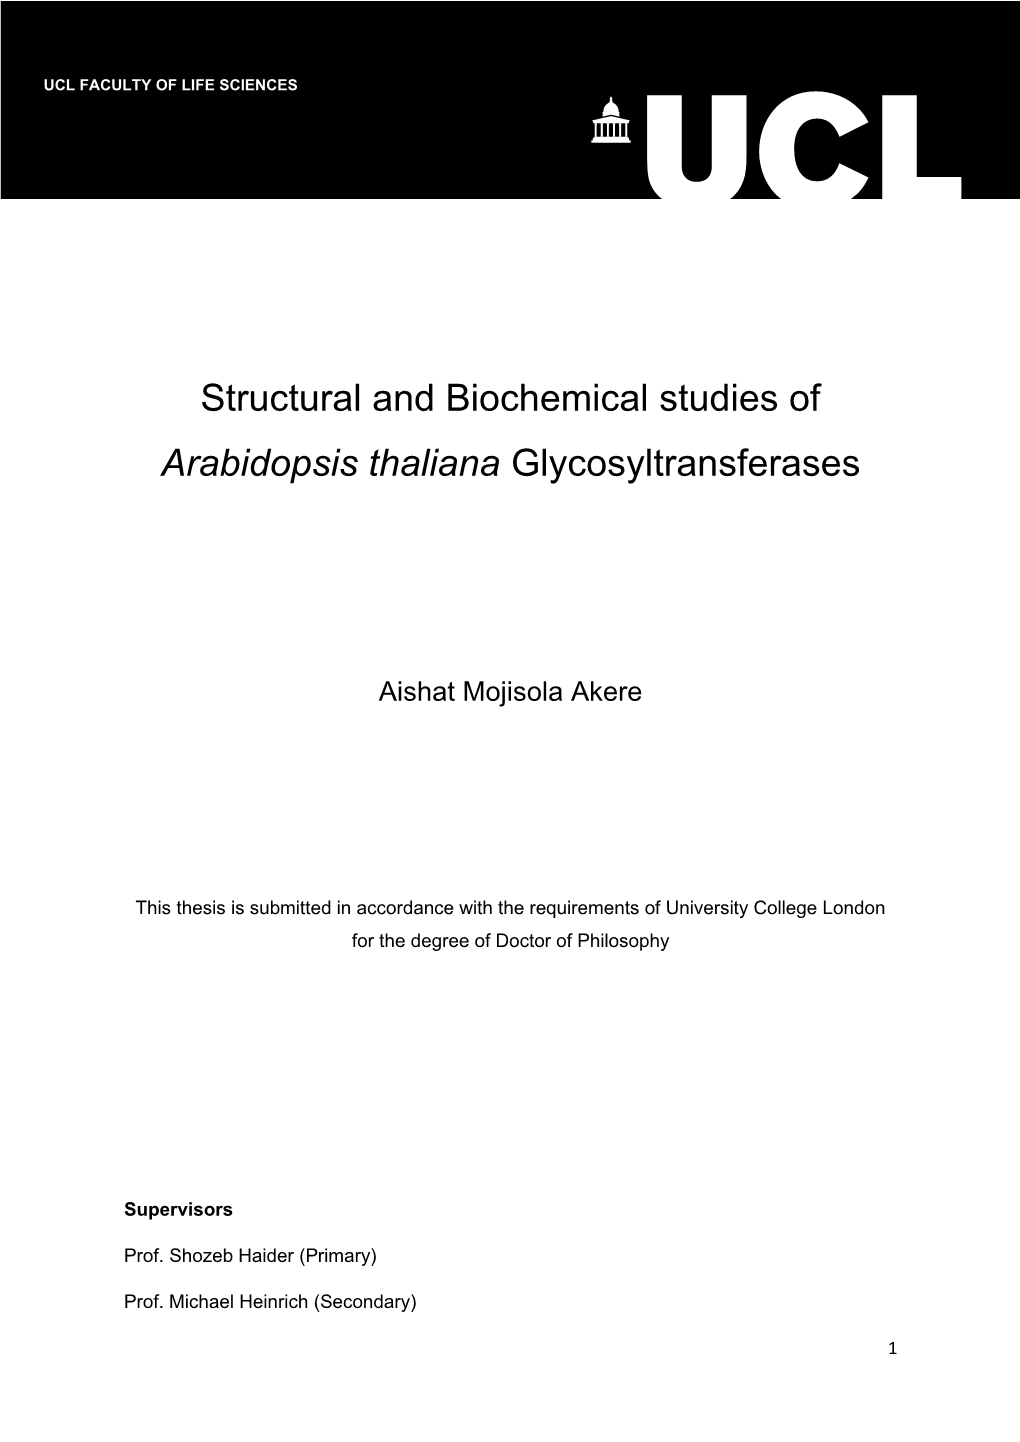 Structural and Biochemical Studies of Arabidopsis Thaliana Glycosyltransferases